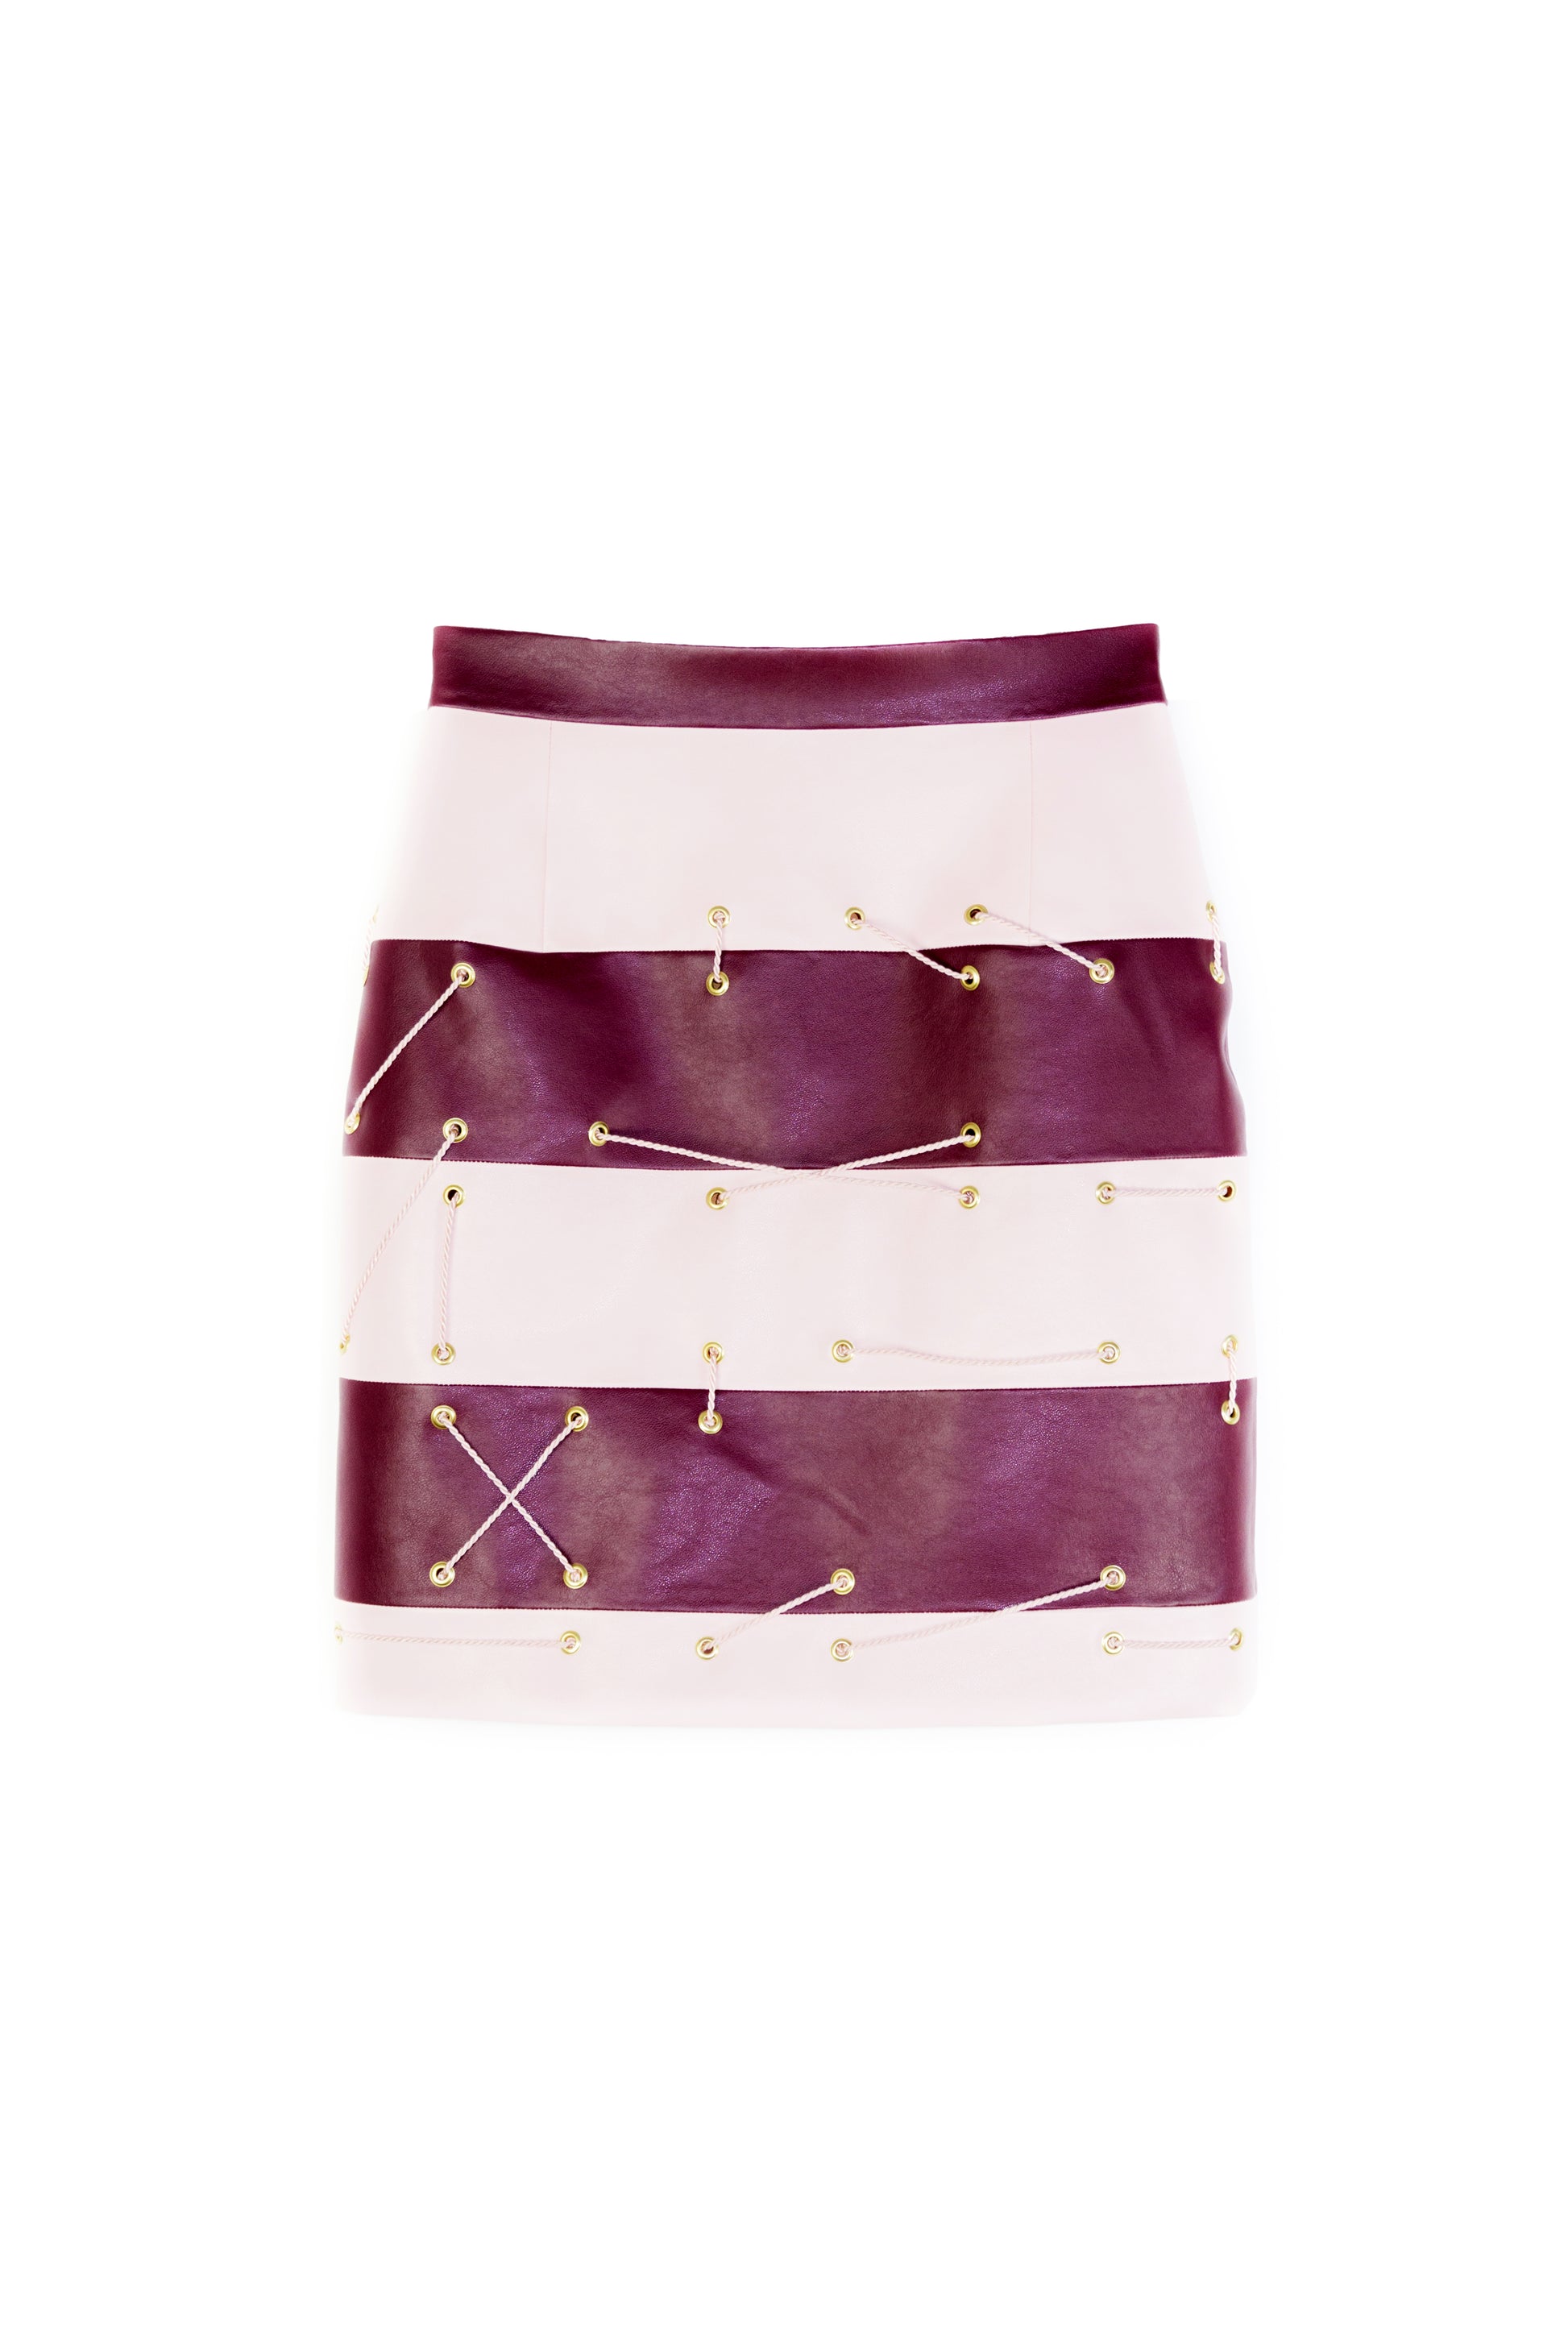 Tight Panel Skirt in Imitation Leather with Lacing – Bordeaux & Pearl Pink - Manuel Essl Design